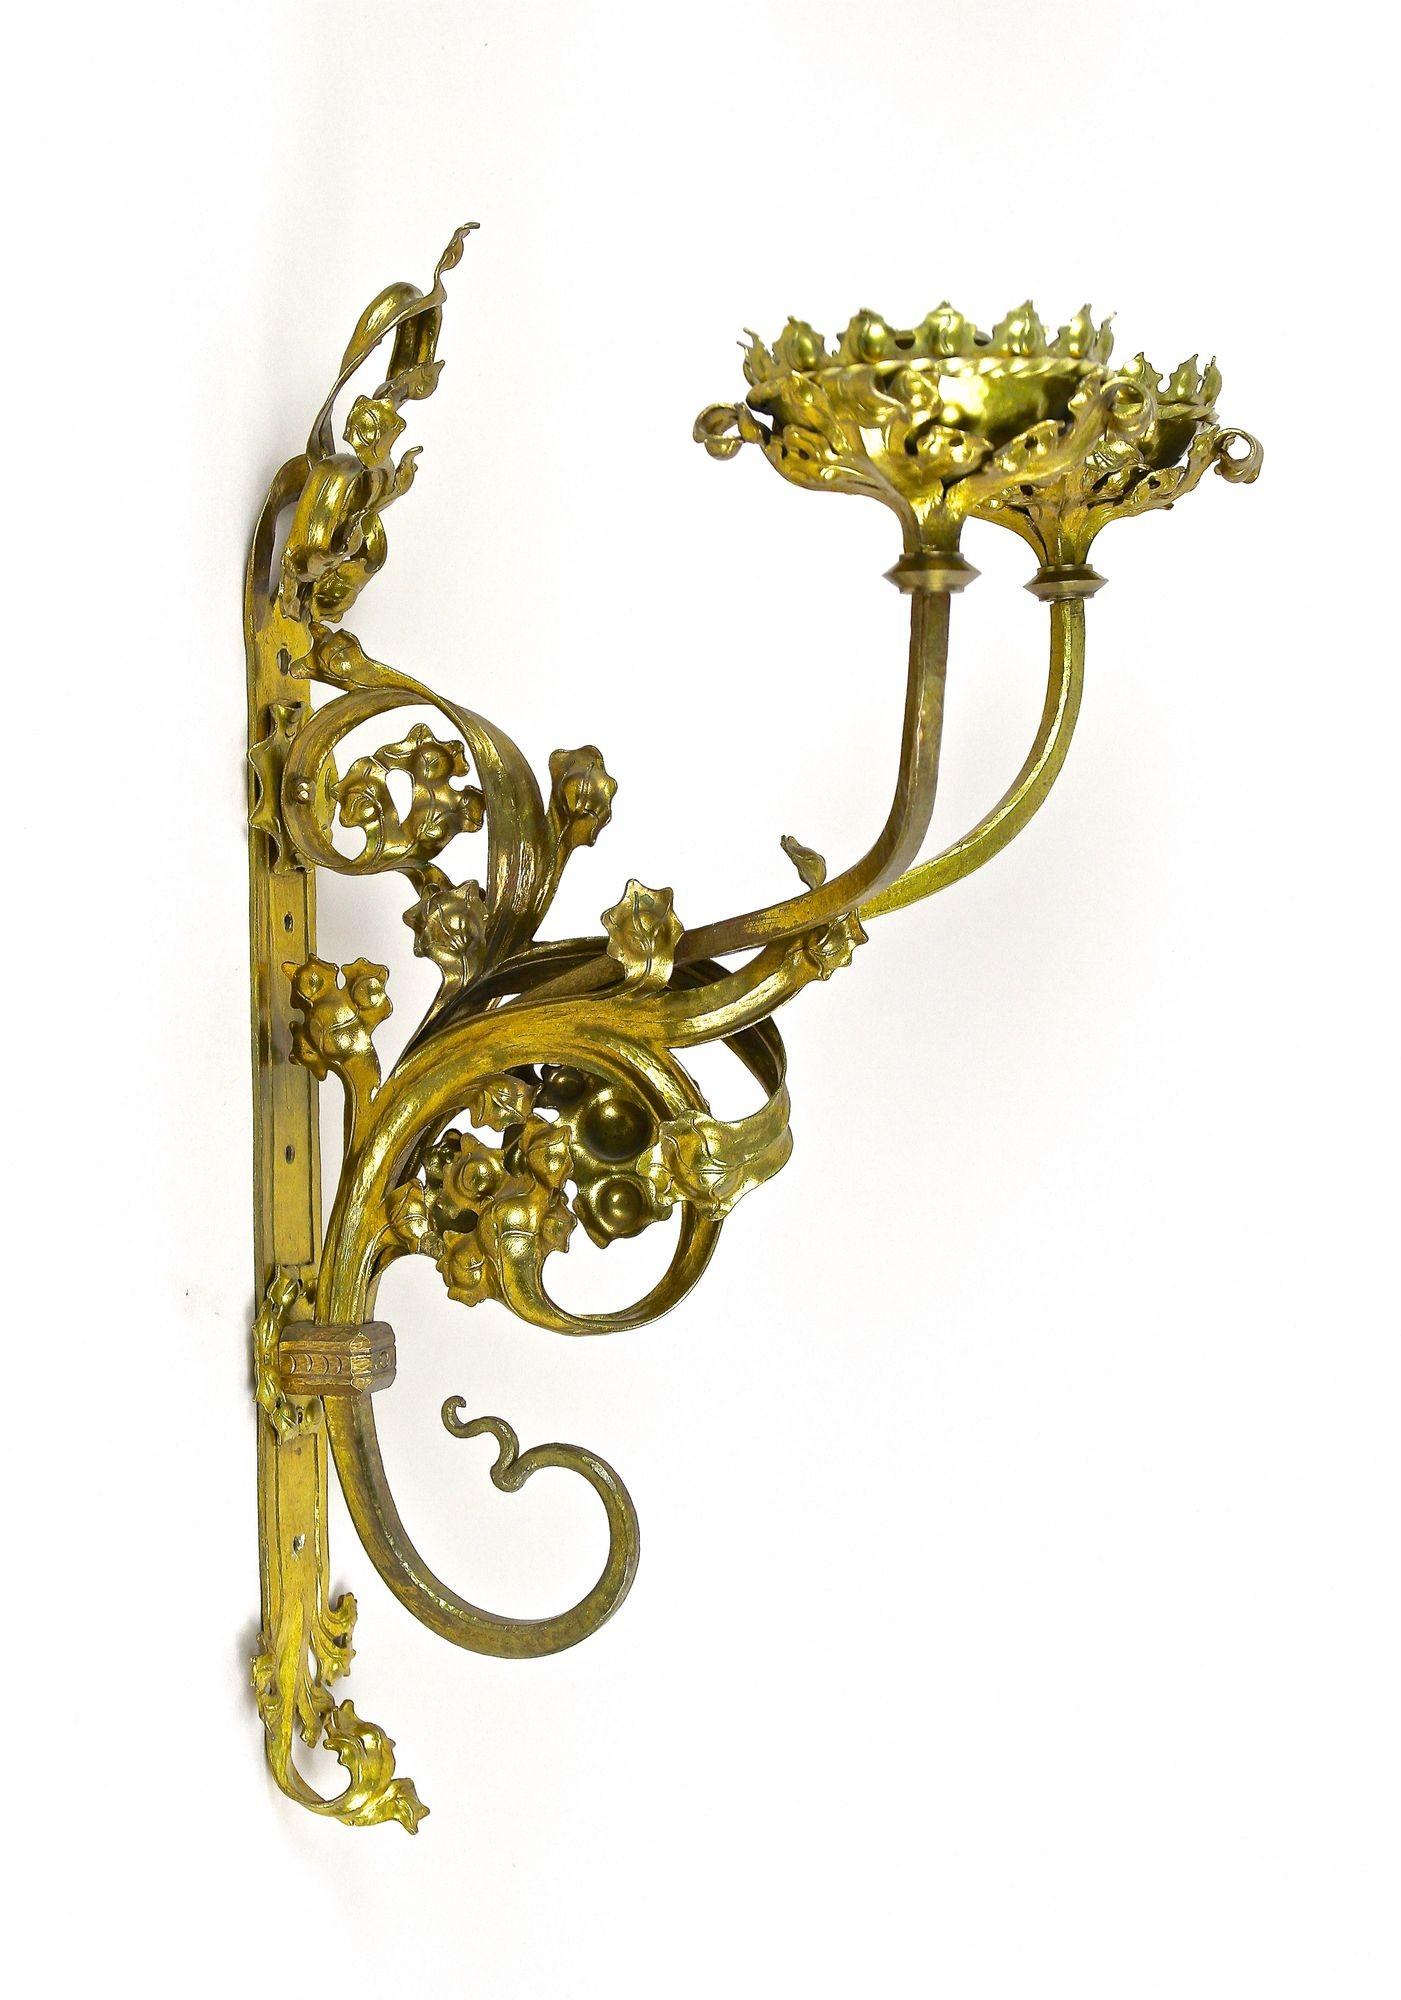 Remarkable pair of handforged 19th century candle wall sconces from the period around 1890 in Austria. Artfully crafted out of fine brass, these large candle sconces impress with their exceptional quality and design. Made in the late 19th century,